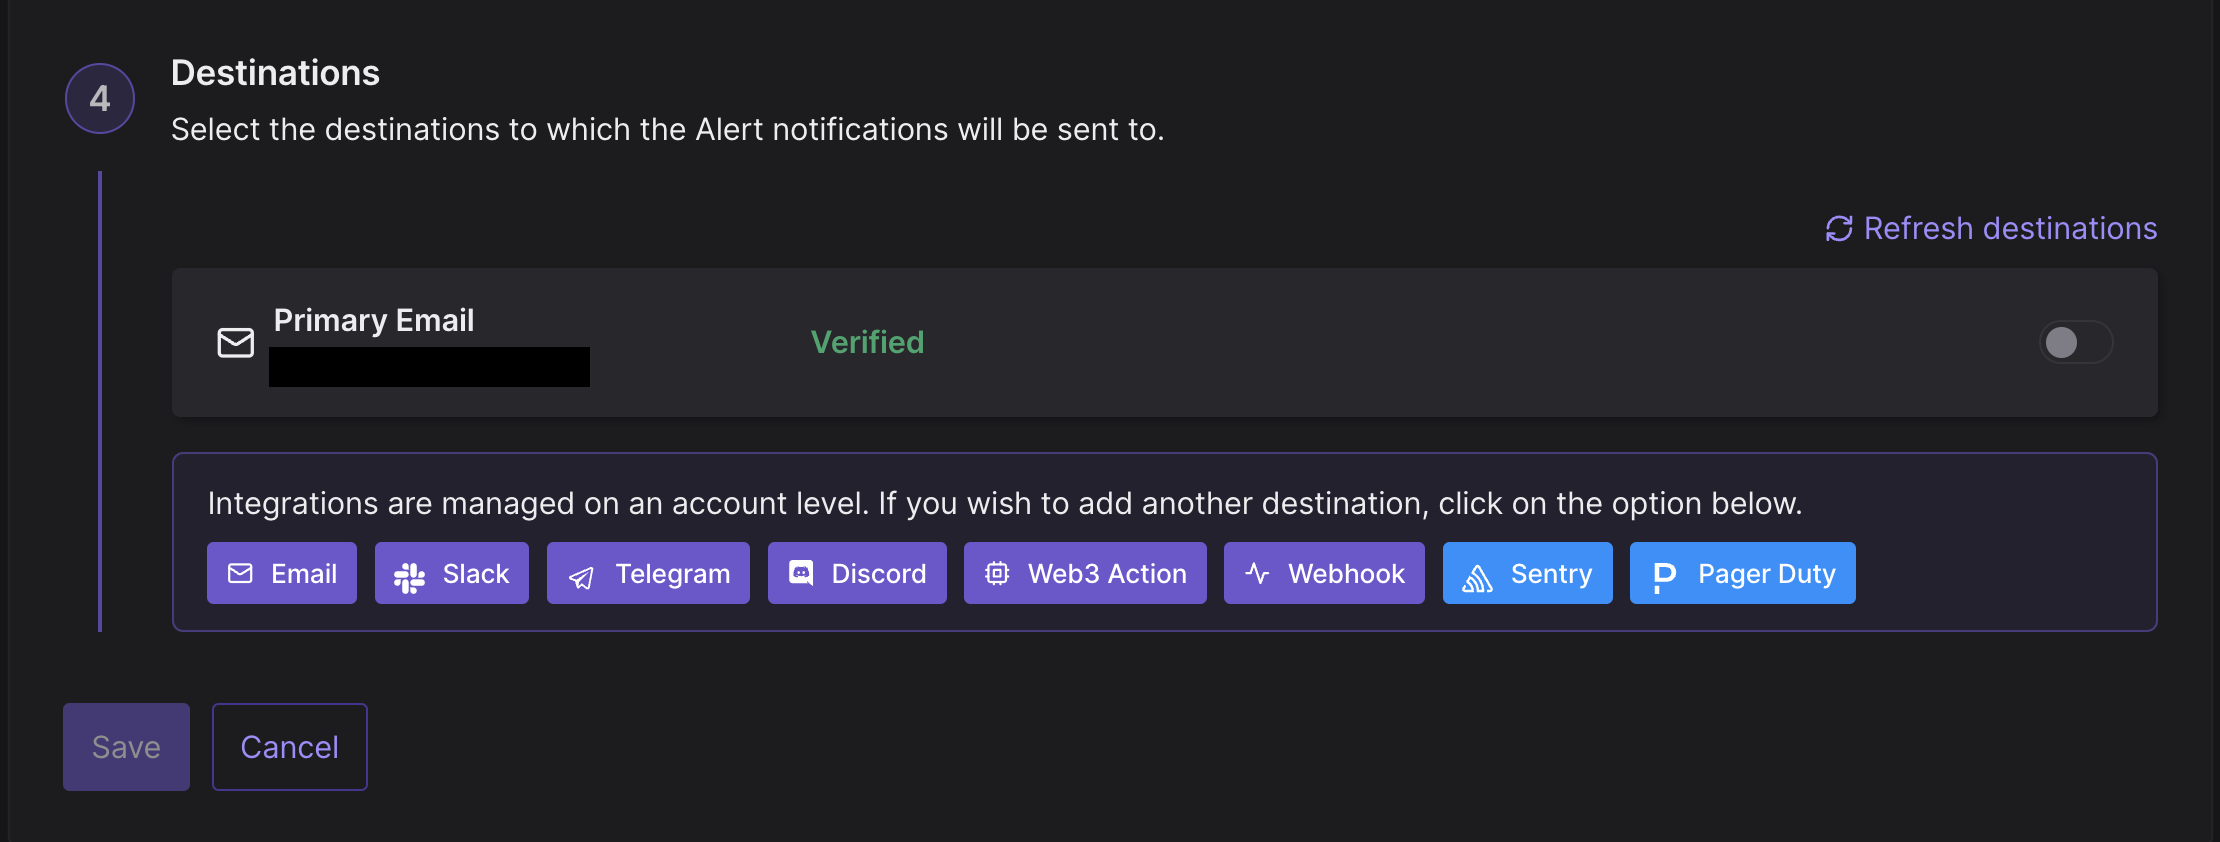 Setting Email as the Alert Destination